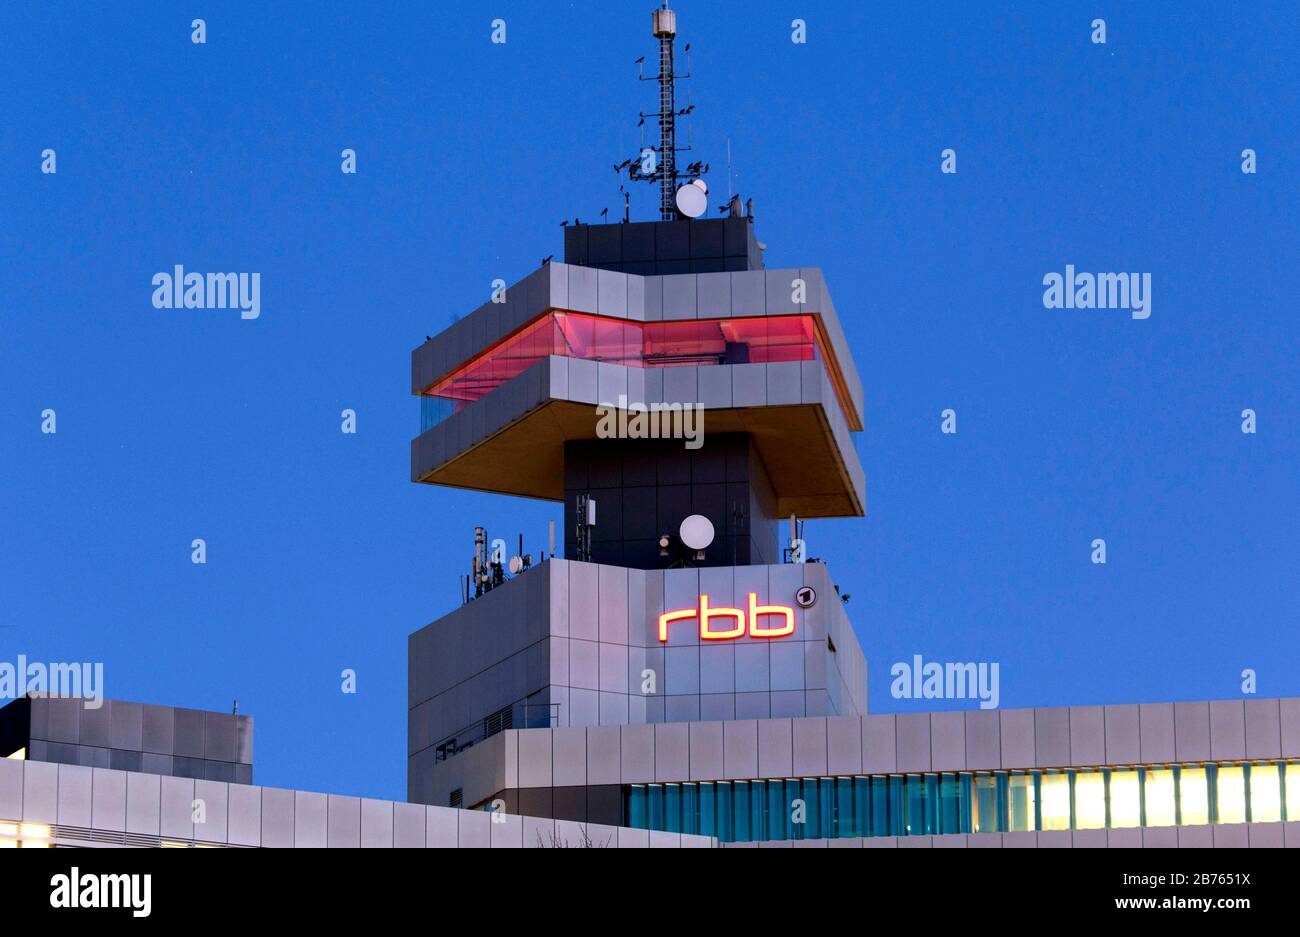 View on 21.01.2016 of the rbb television centre at Theodor-Heuss-Platz in Berlin. Rundfunk Berlin-Brandenburg,rbb, is the state broadcasting corporation for the states of Berlin and Brandenburg. [automated translation] Stock Photo